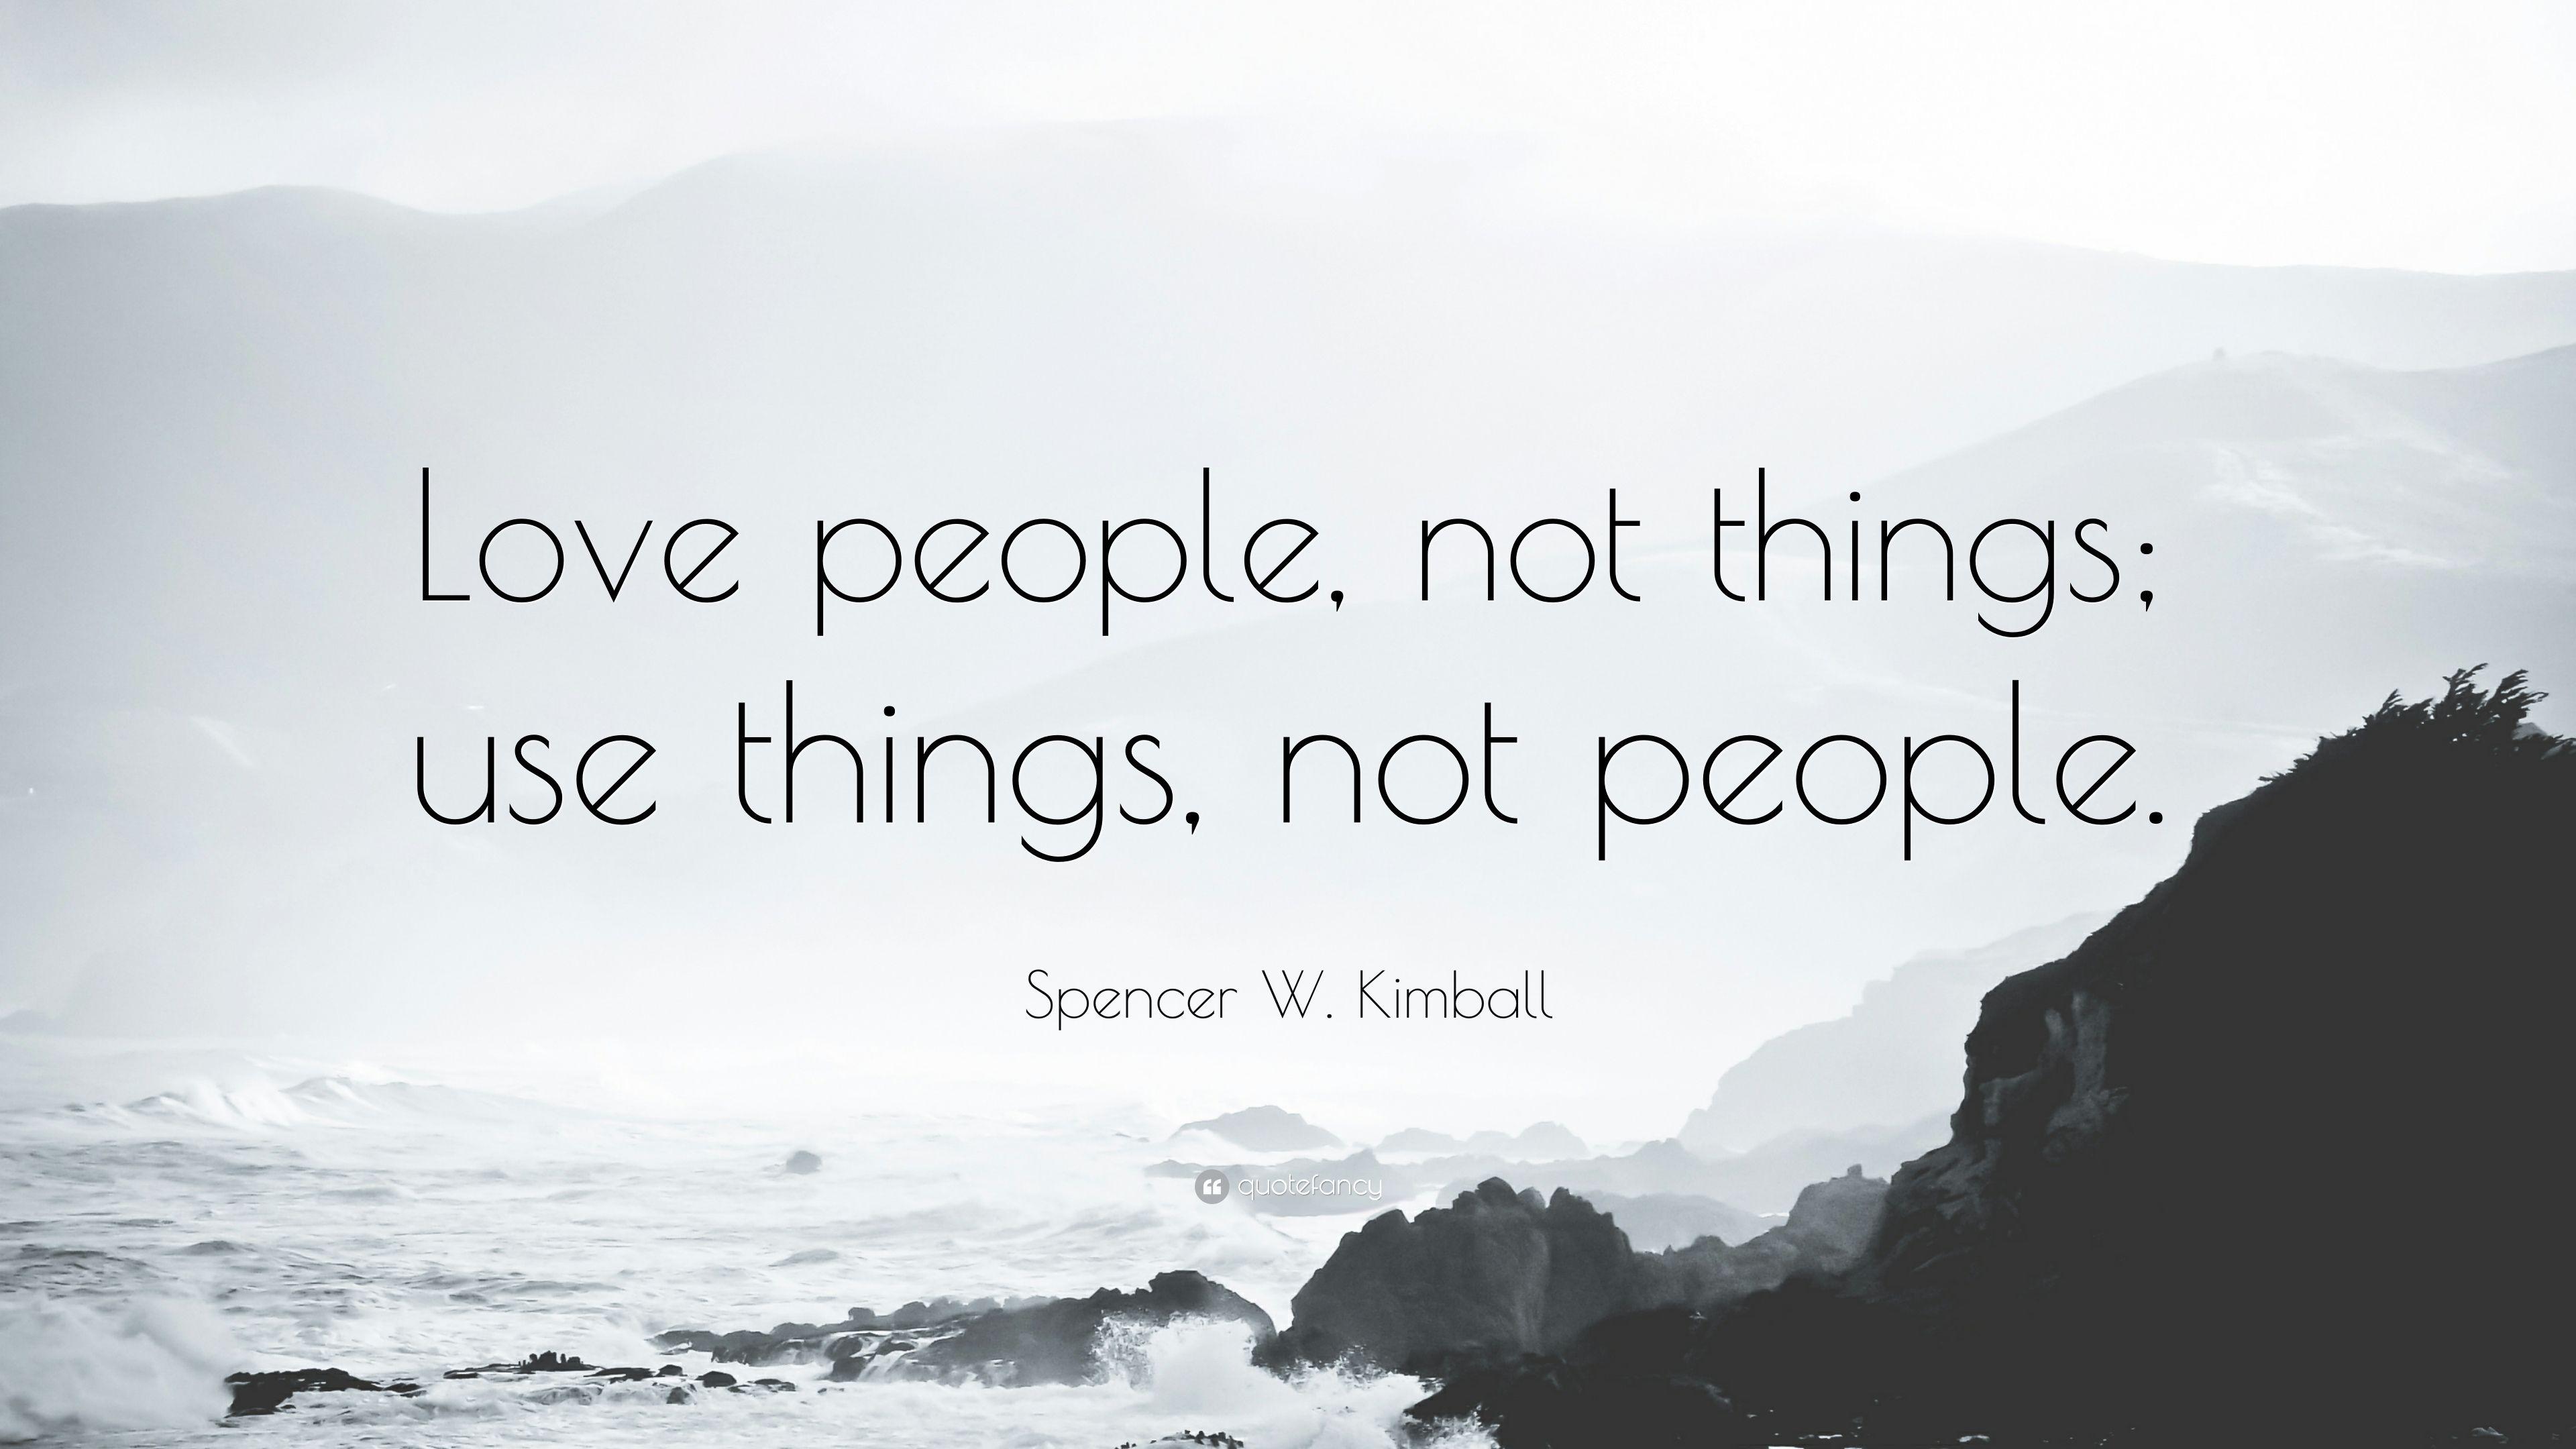 Spencer W. Kimball Quote: “Love people, not things; use things, not